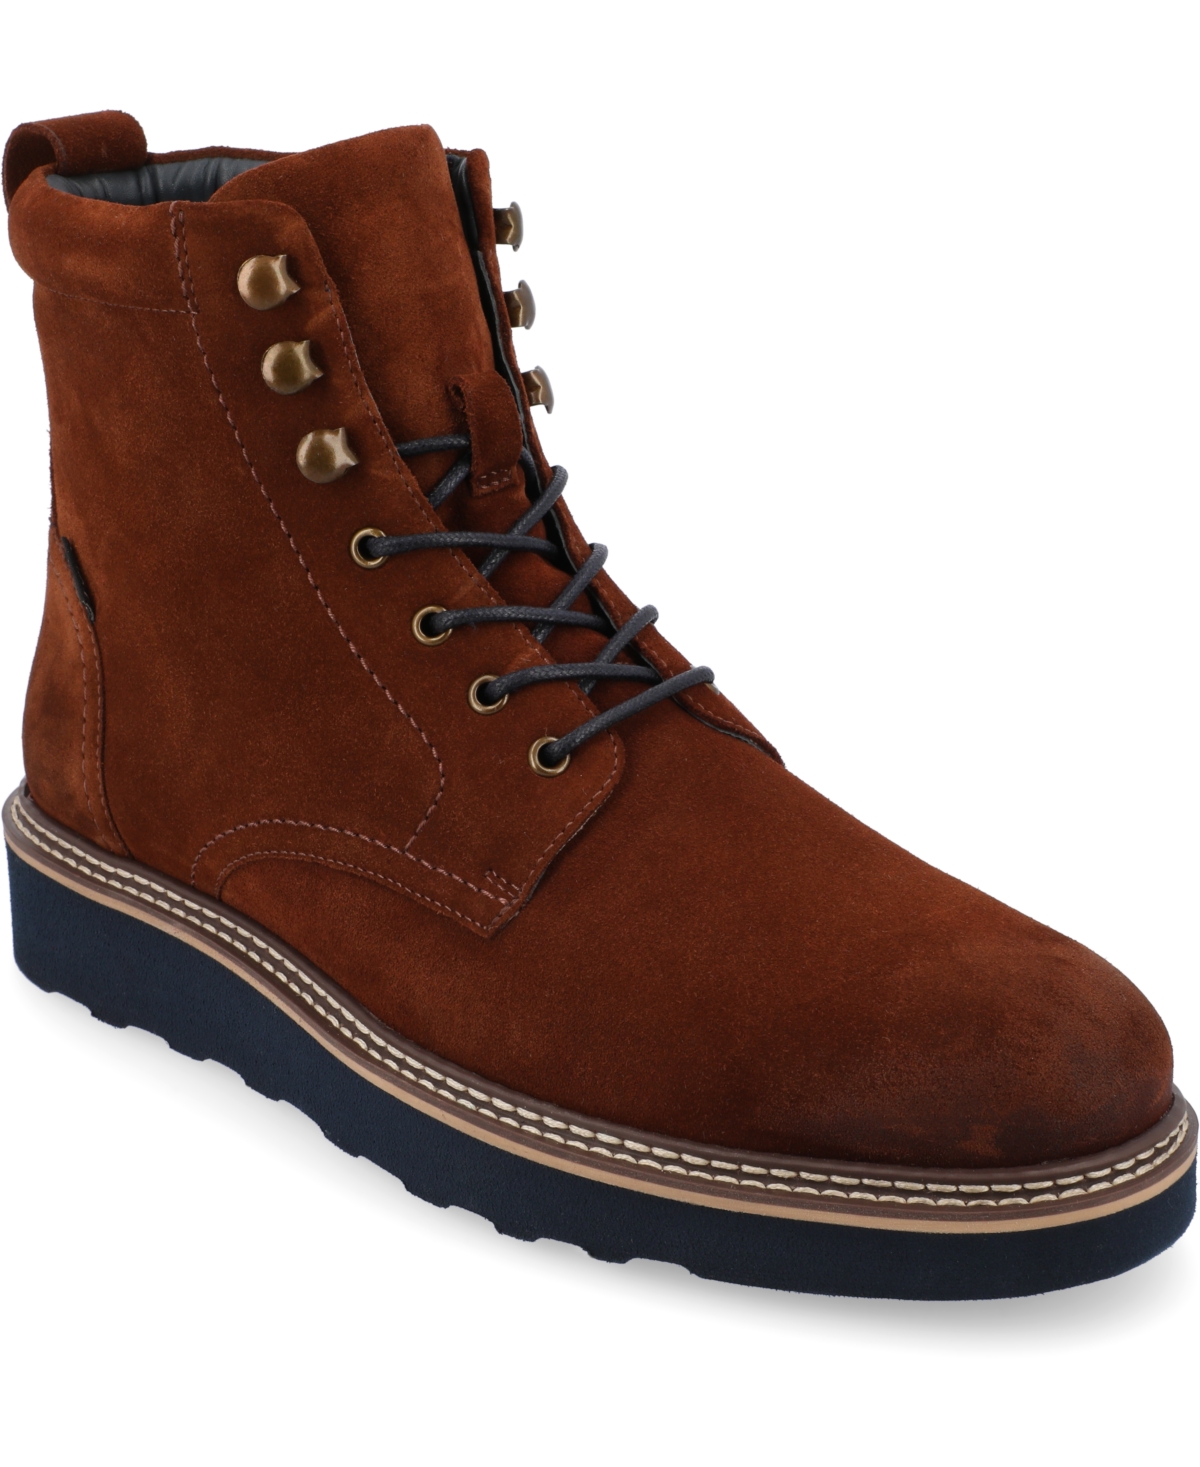 Taft 365 Men's Model 006 Wedge Sole Lace-up Boots In Chili